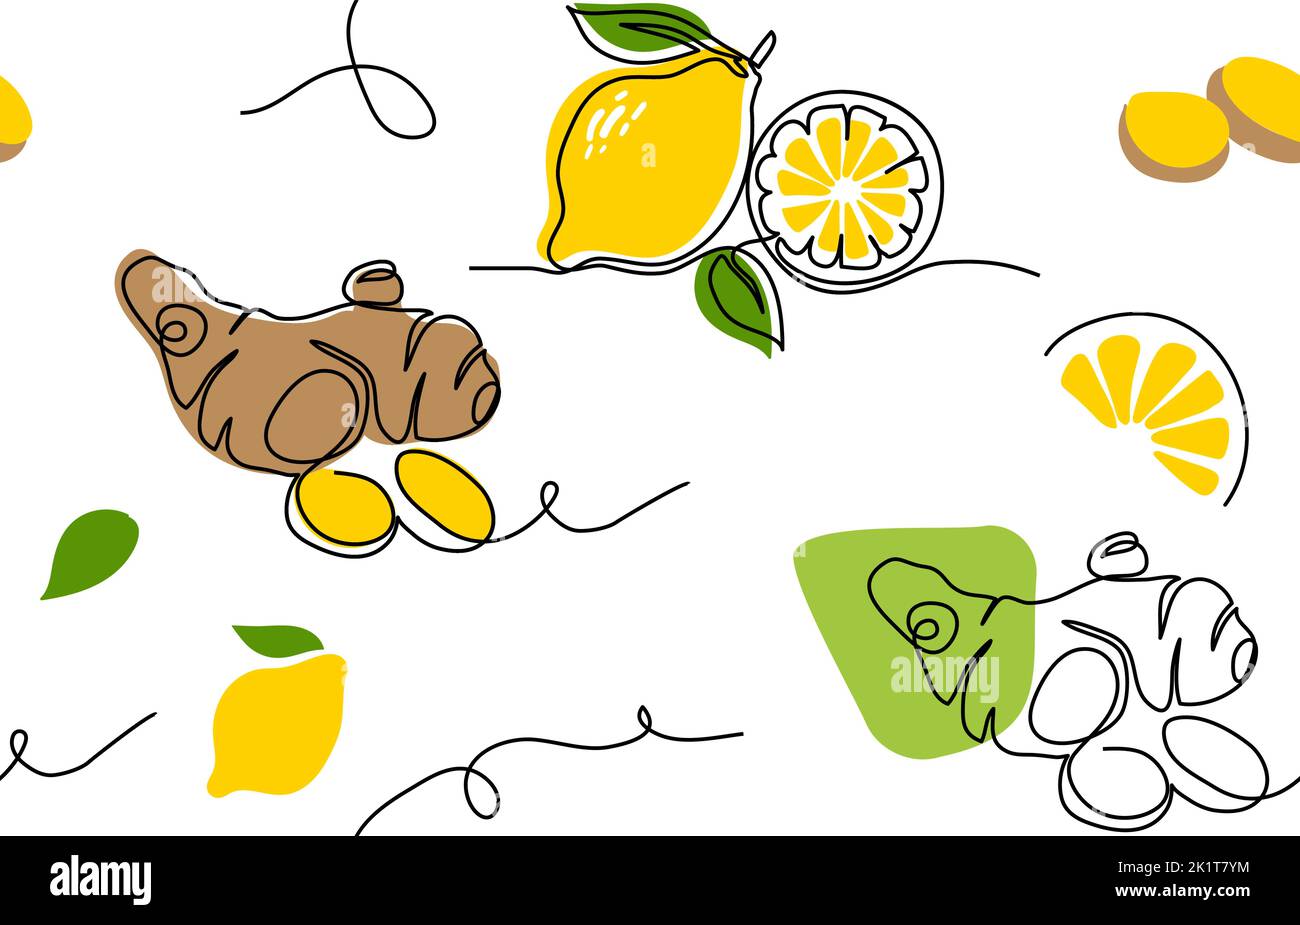 Ginger and lemon vector pattern. One continuous line art drawing pattern for kitchen or cafe decoration, tea or drink packaging Stock Vector